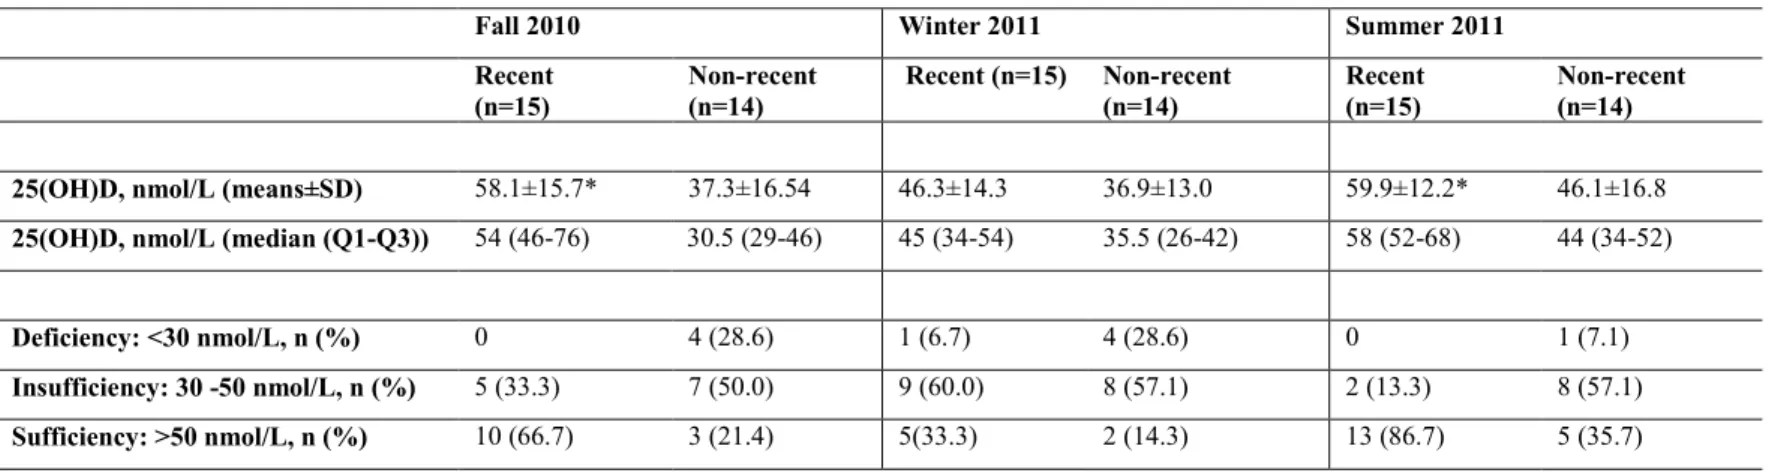 Table 3:  Mean 25(OH)D concentrations and proportions of recent and non-recent Africans at different thresholds by season  